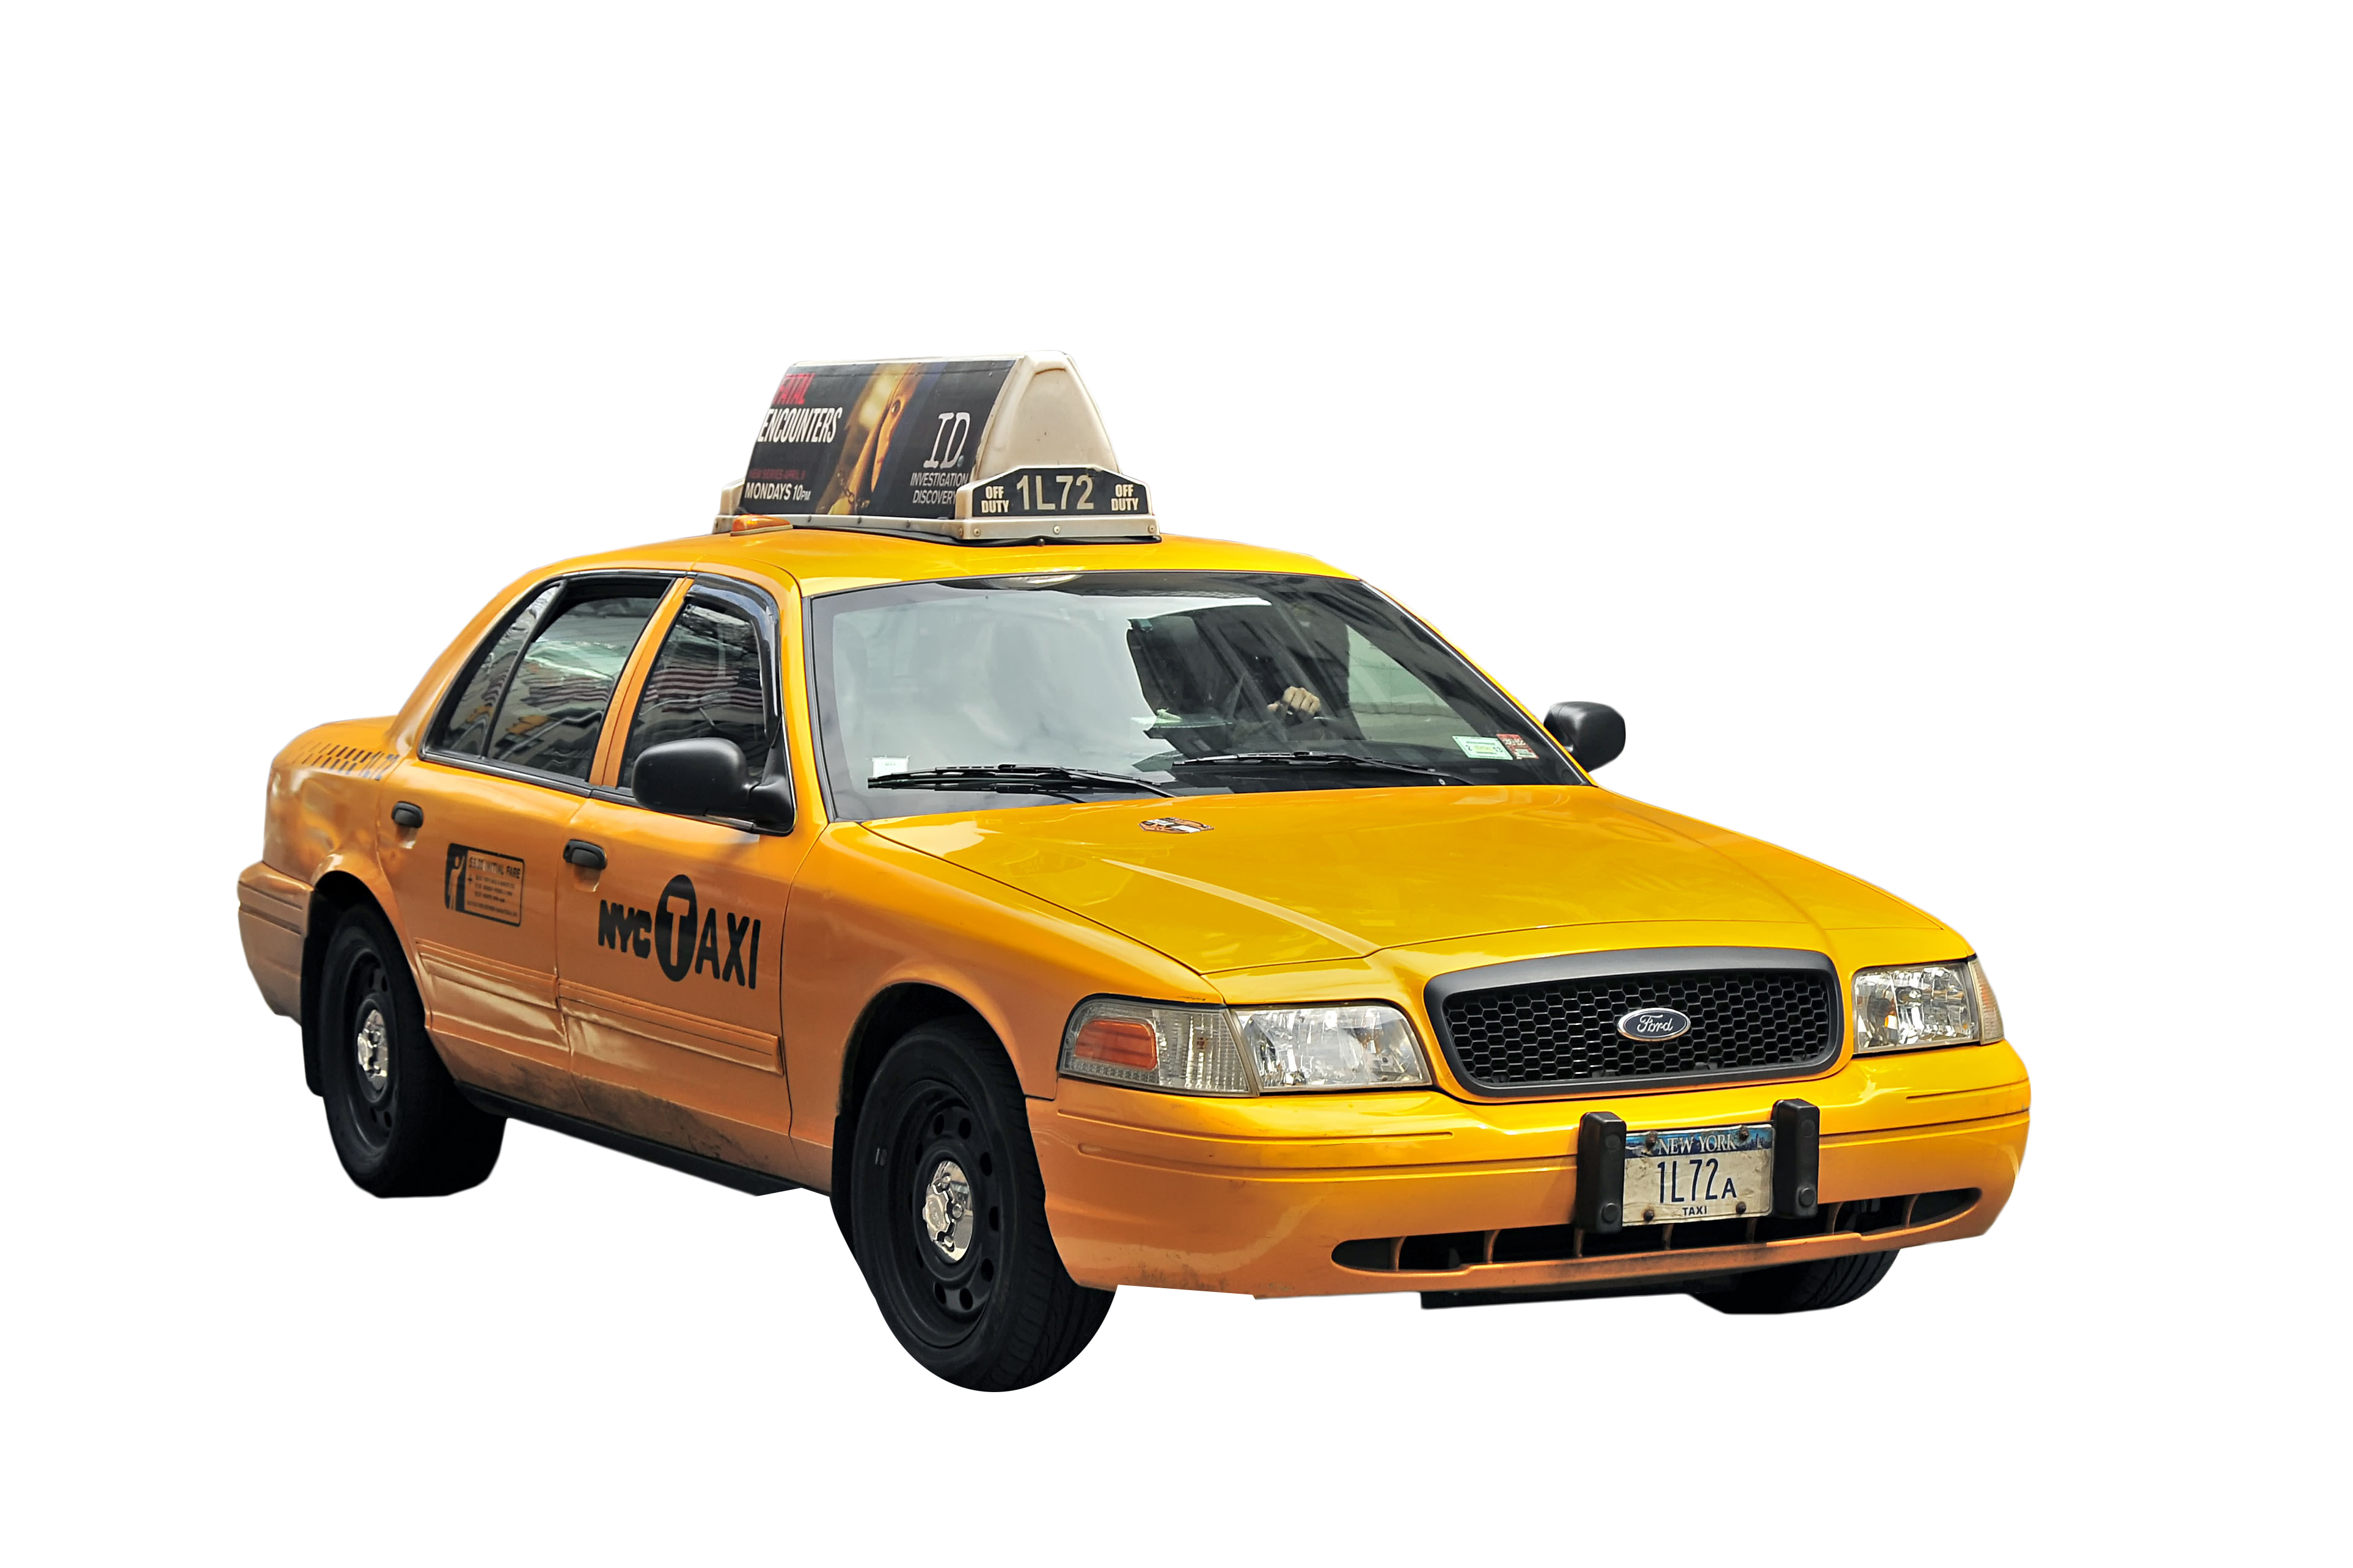 1995er Ford Crown Victoria New York Taxi